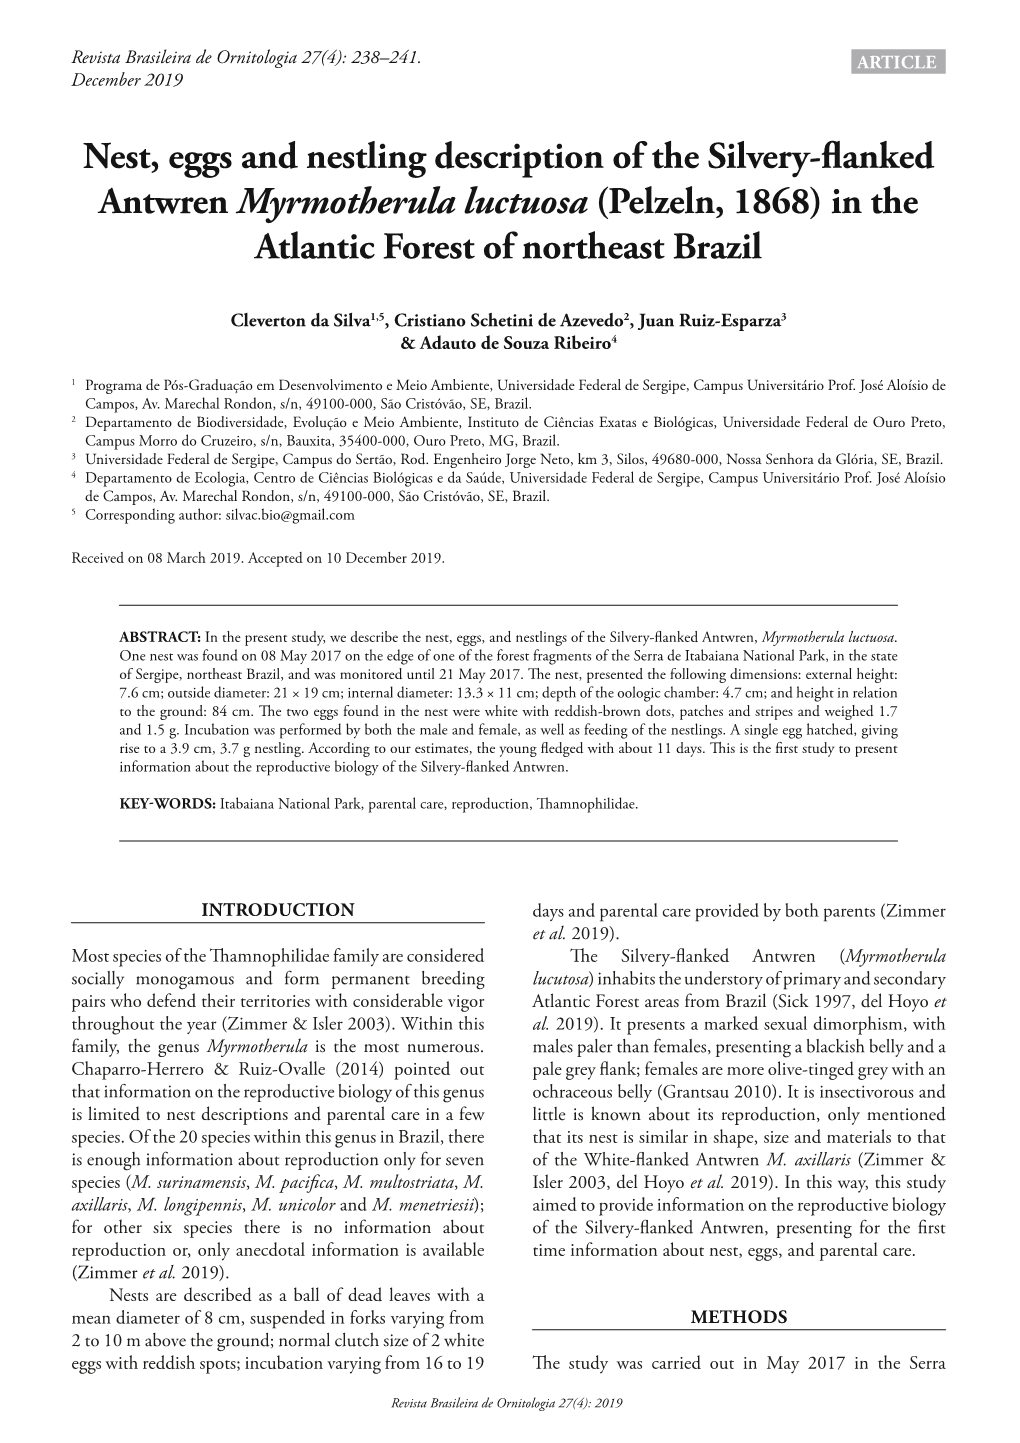 Nest, Eggs and Nestling Description of the Silvery-Flanked Antwren Myrmotherula Luctuosa (Pelzeln, 1868) in the Atlantic Forest of Northeast Brazil